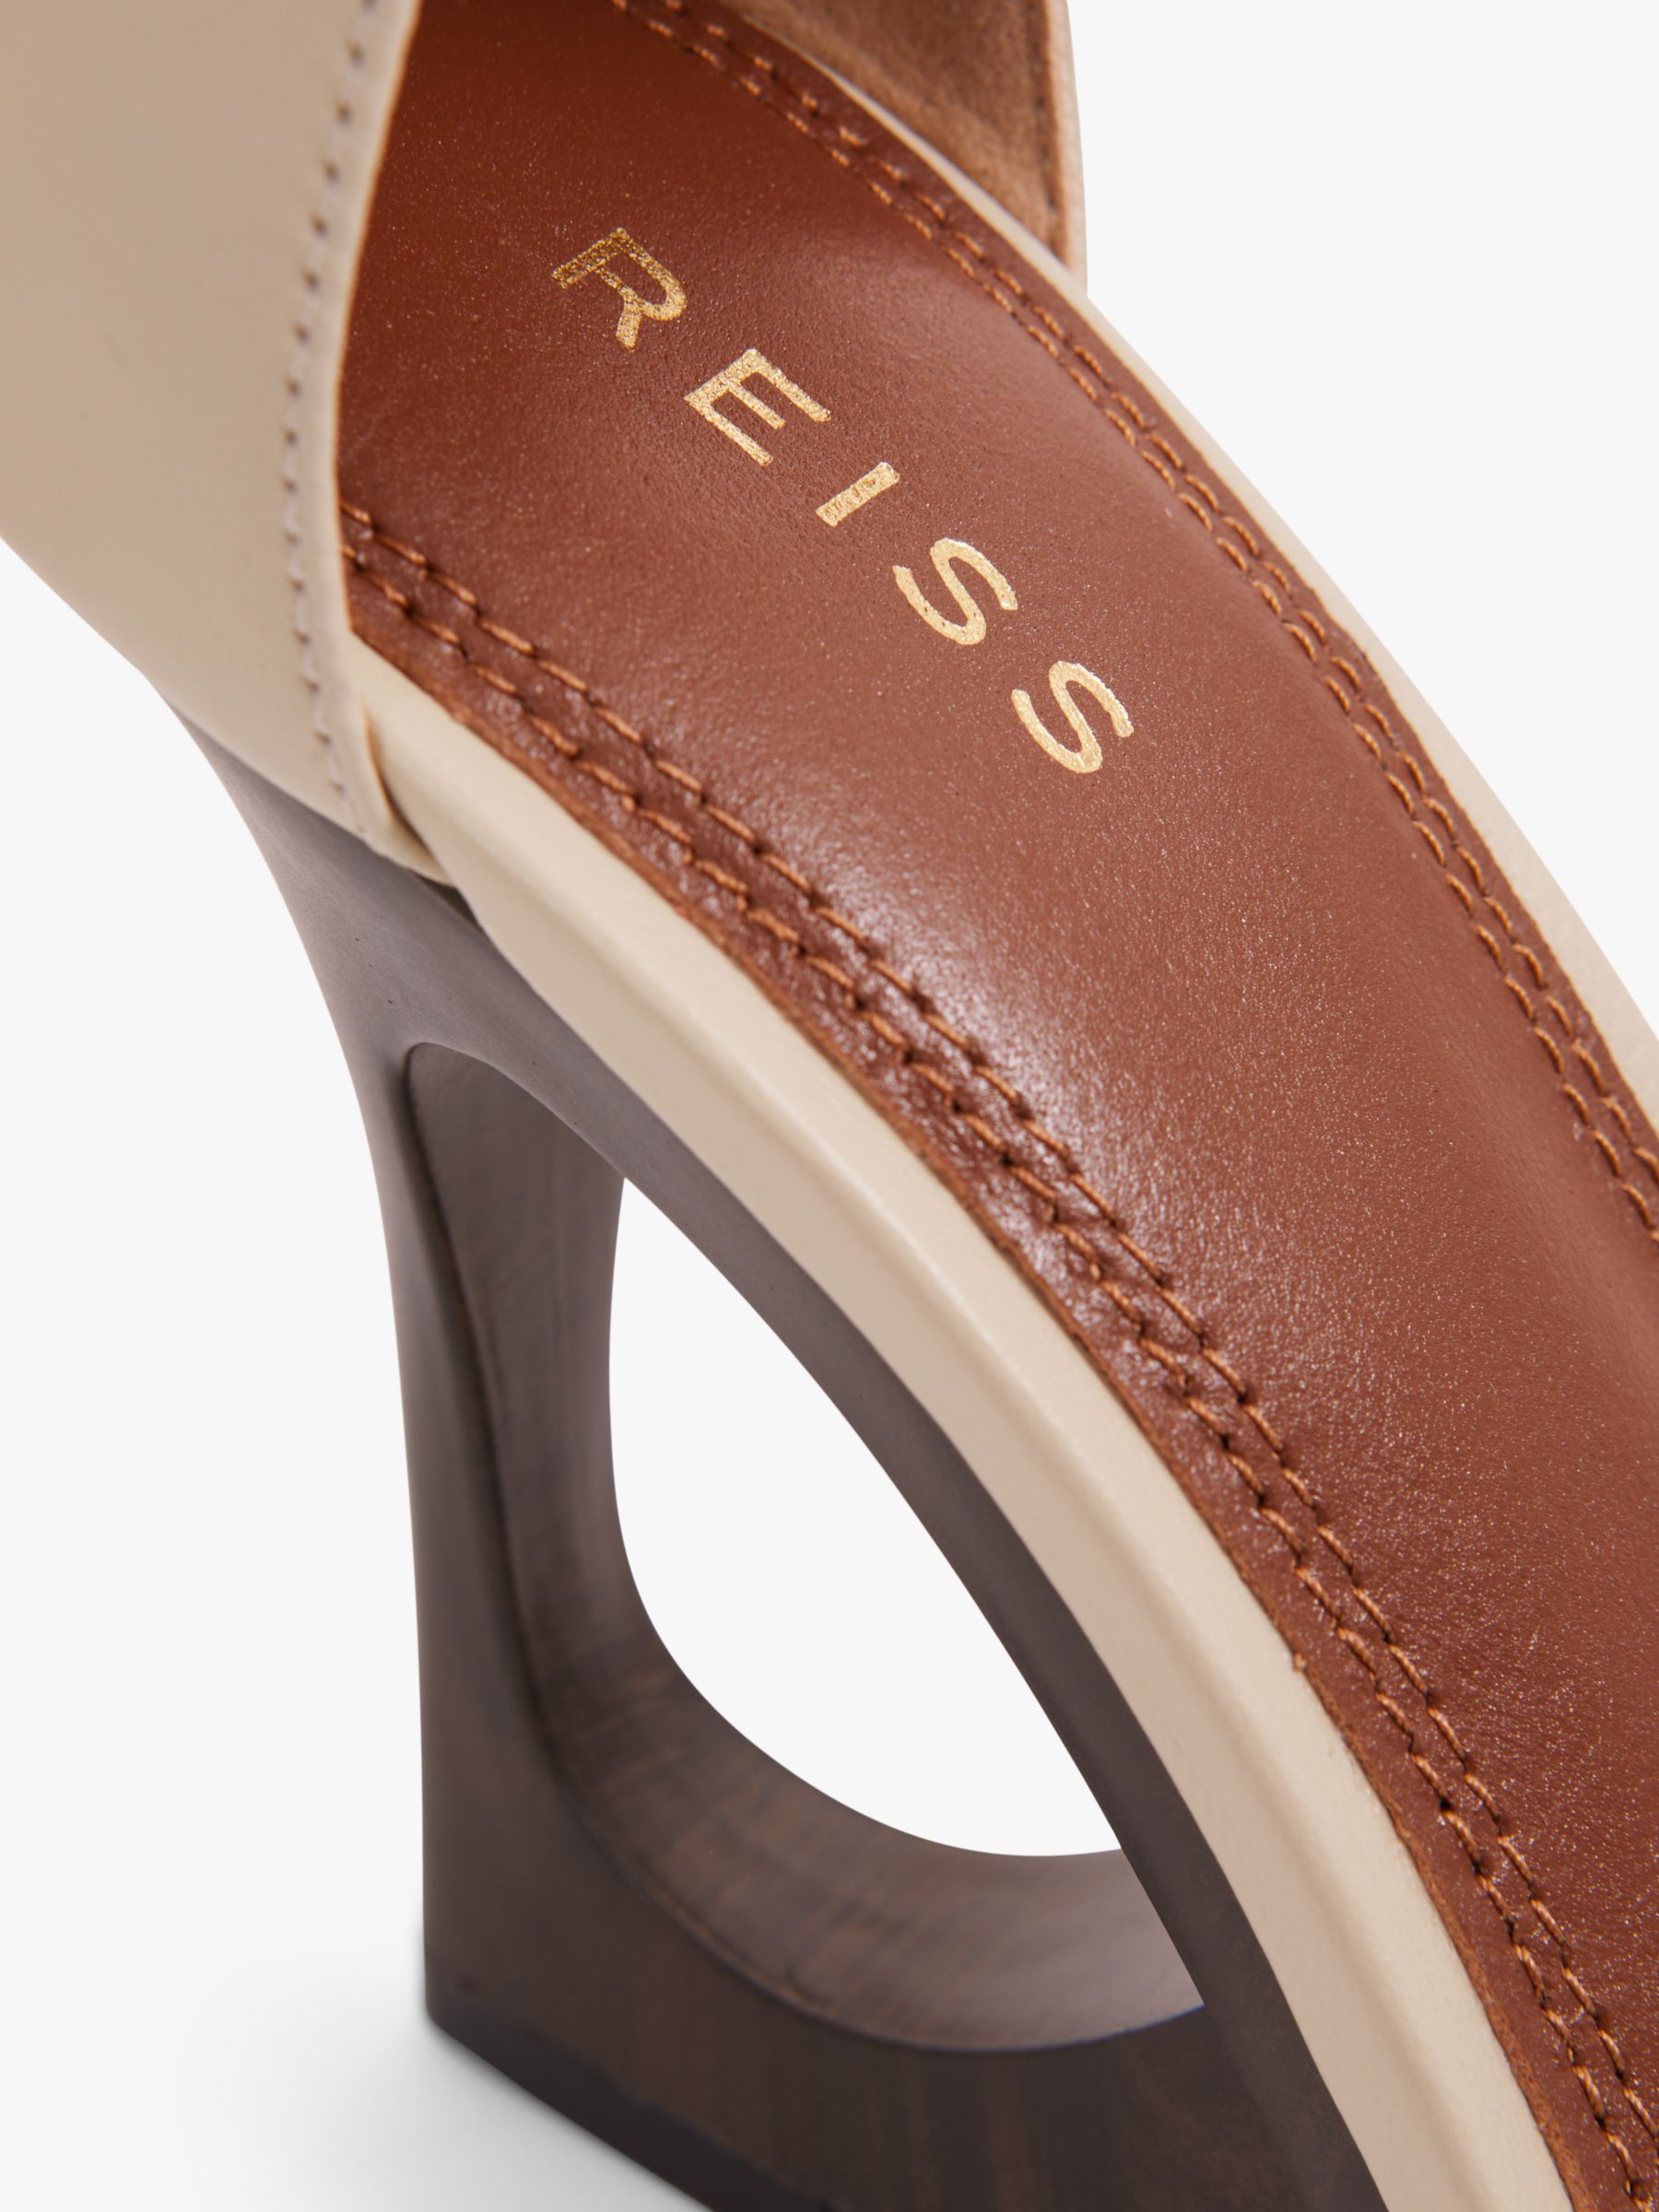 Buy Reiss Cora Sculptural Wedge Heel Leather Sandals, Off White Online at johnlewis.com